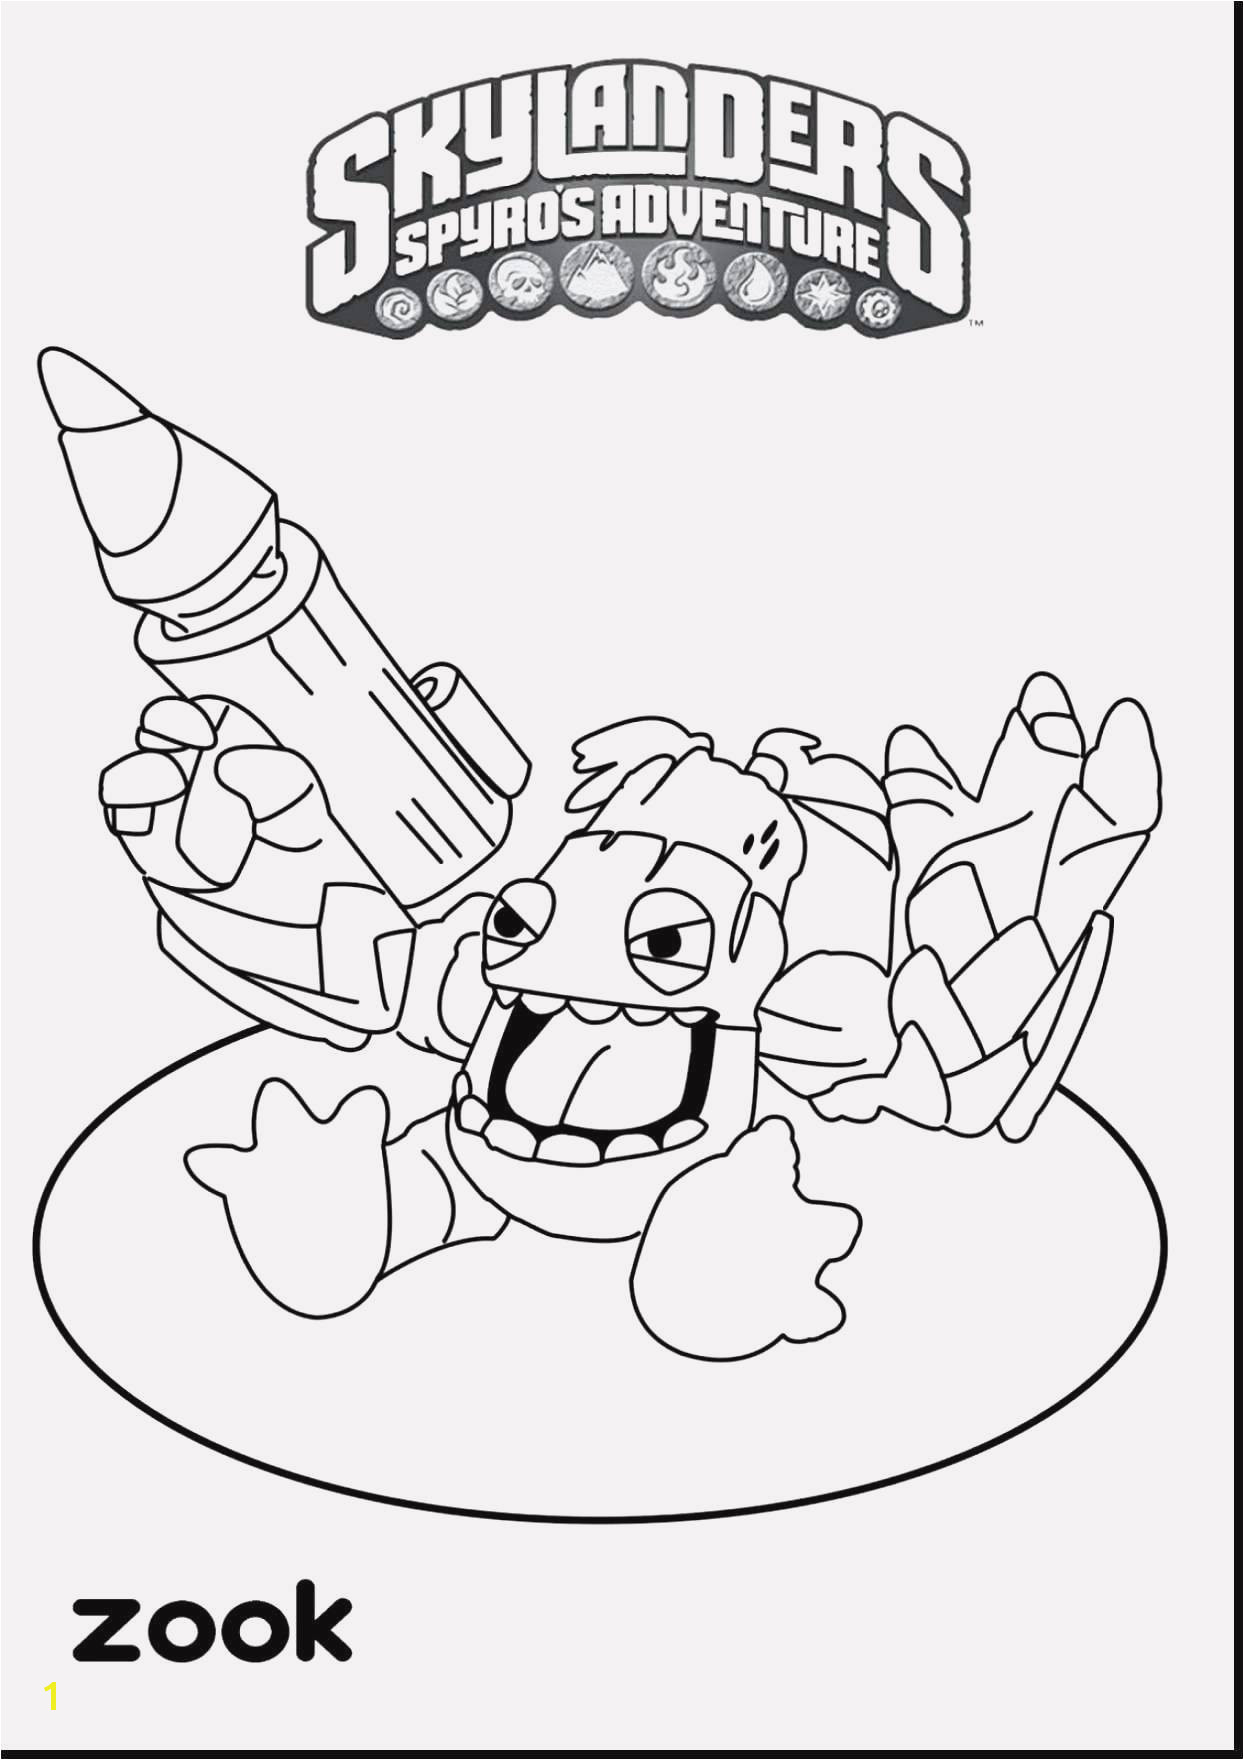 Cool Coloring Page Inspirational Witch Coloring Pages New Crayola Pages 0d Coloring Page Crayola Printable Winnie the Pooh Christmas